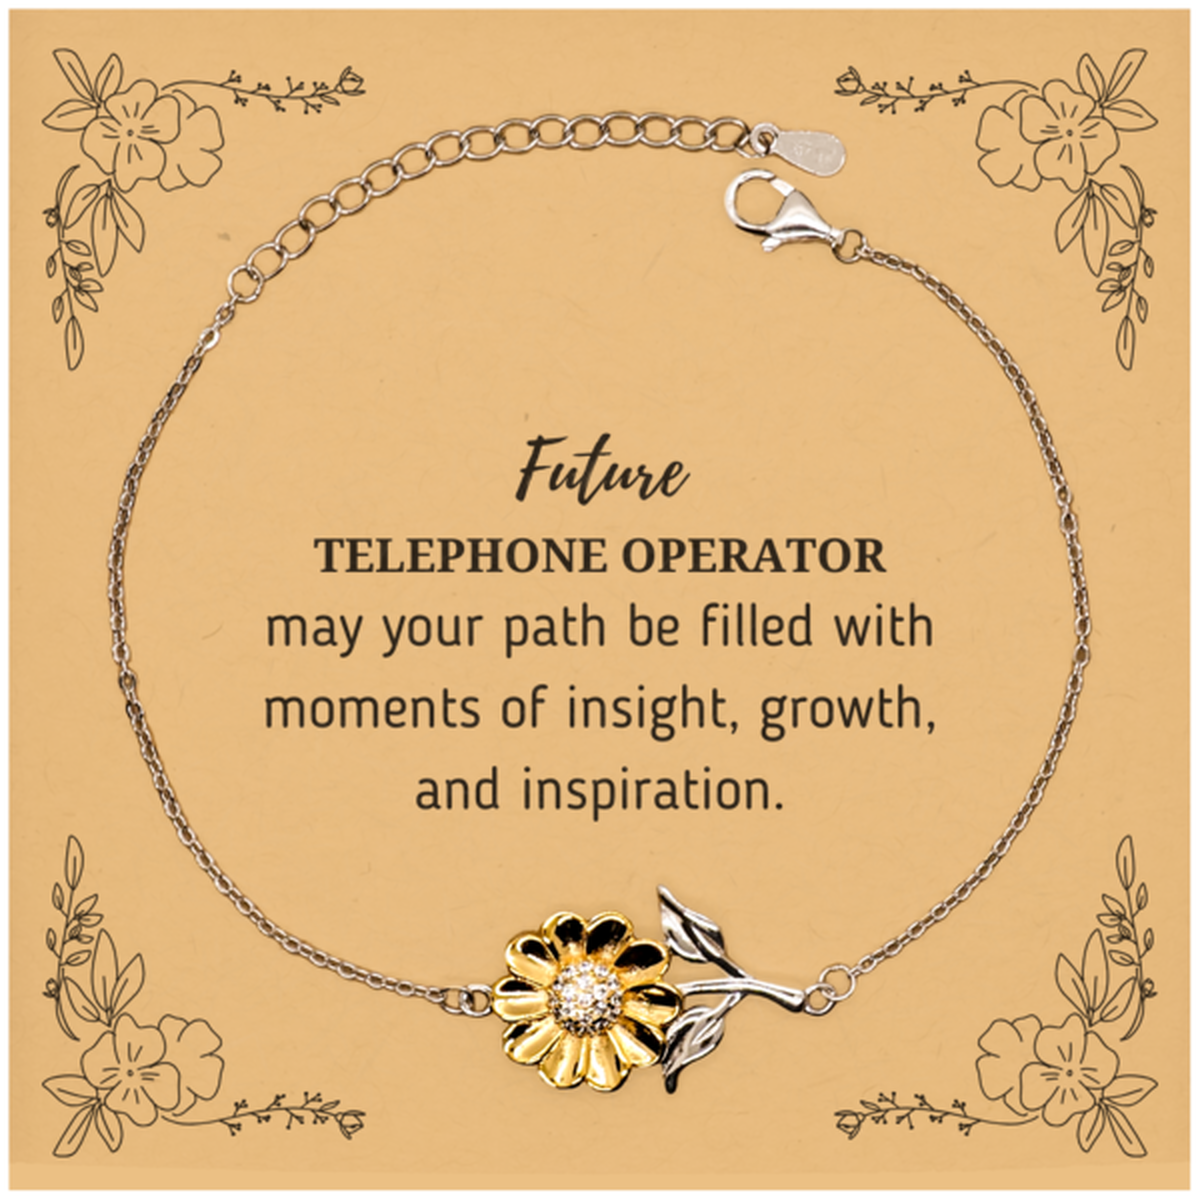 Future Telephone Operator Gifts, May your path be filled with moments of insight, Graduation Gifts for New Telephone Operator, Christmas Unique Sunflower Bracelet For Men, Women, Friends